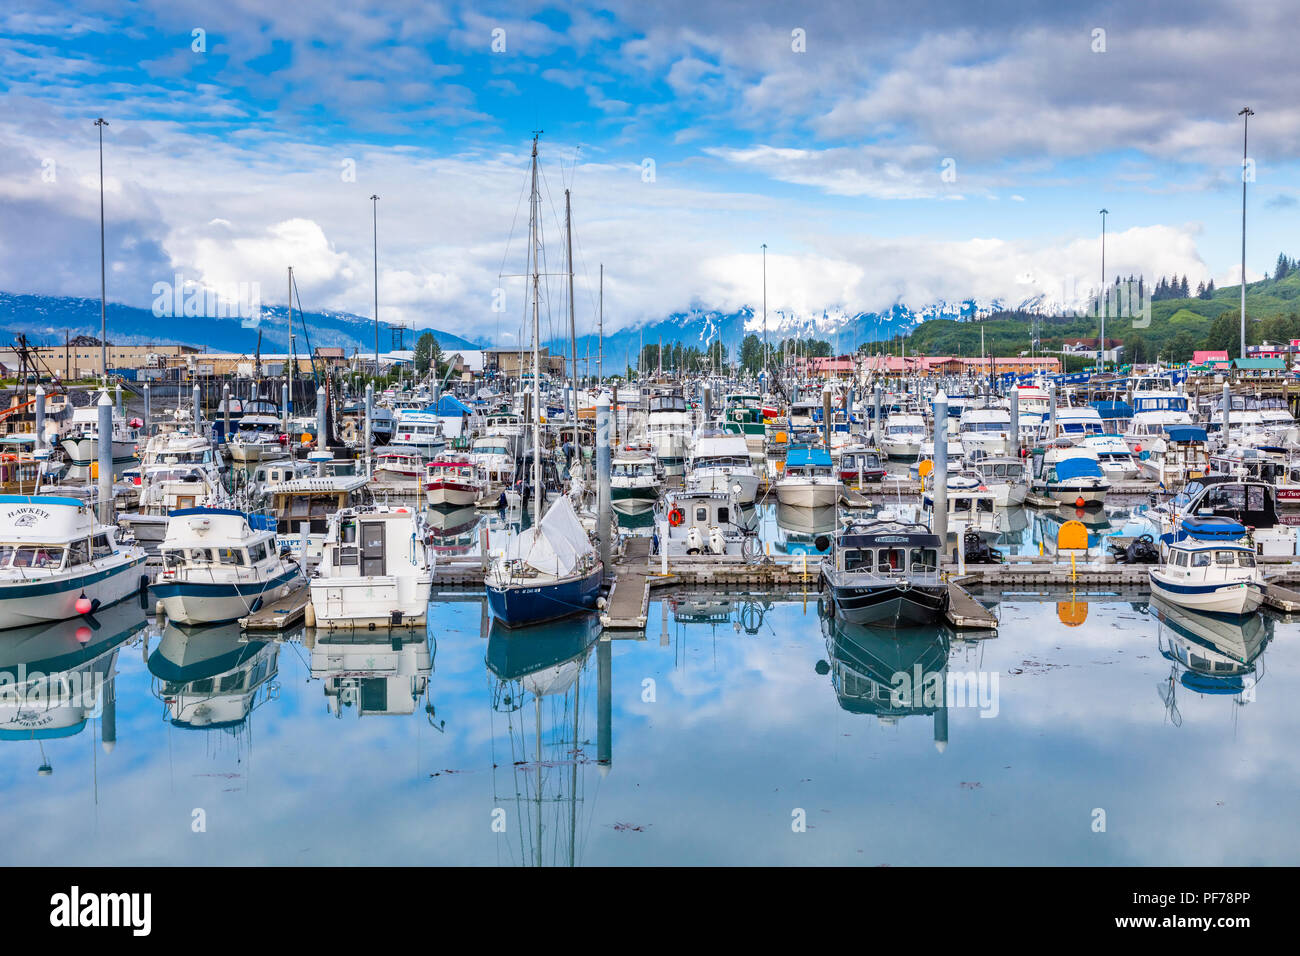 Big white clouds with patches of blue sky over small boat harbor on Prince William Sound in Valdez Alaska Stock Photo